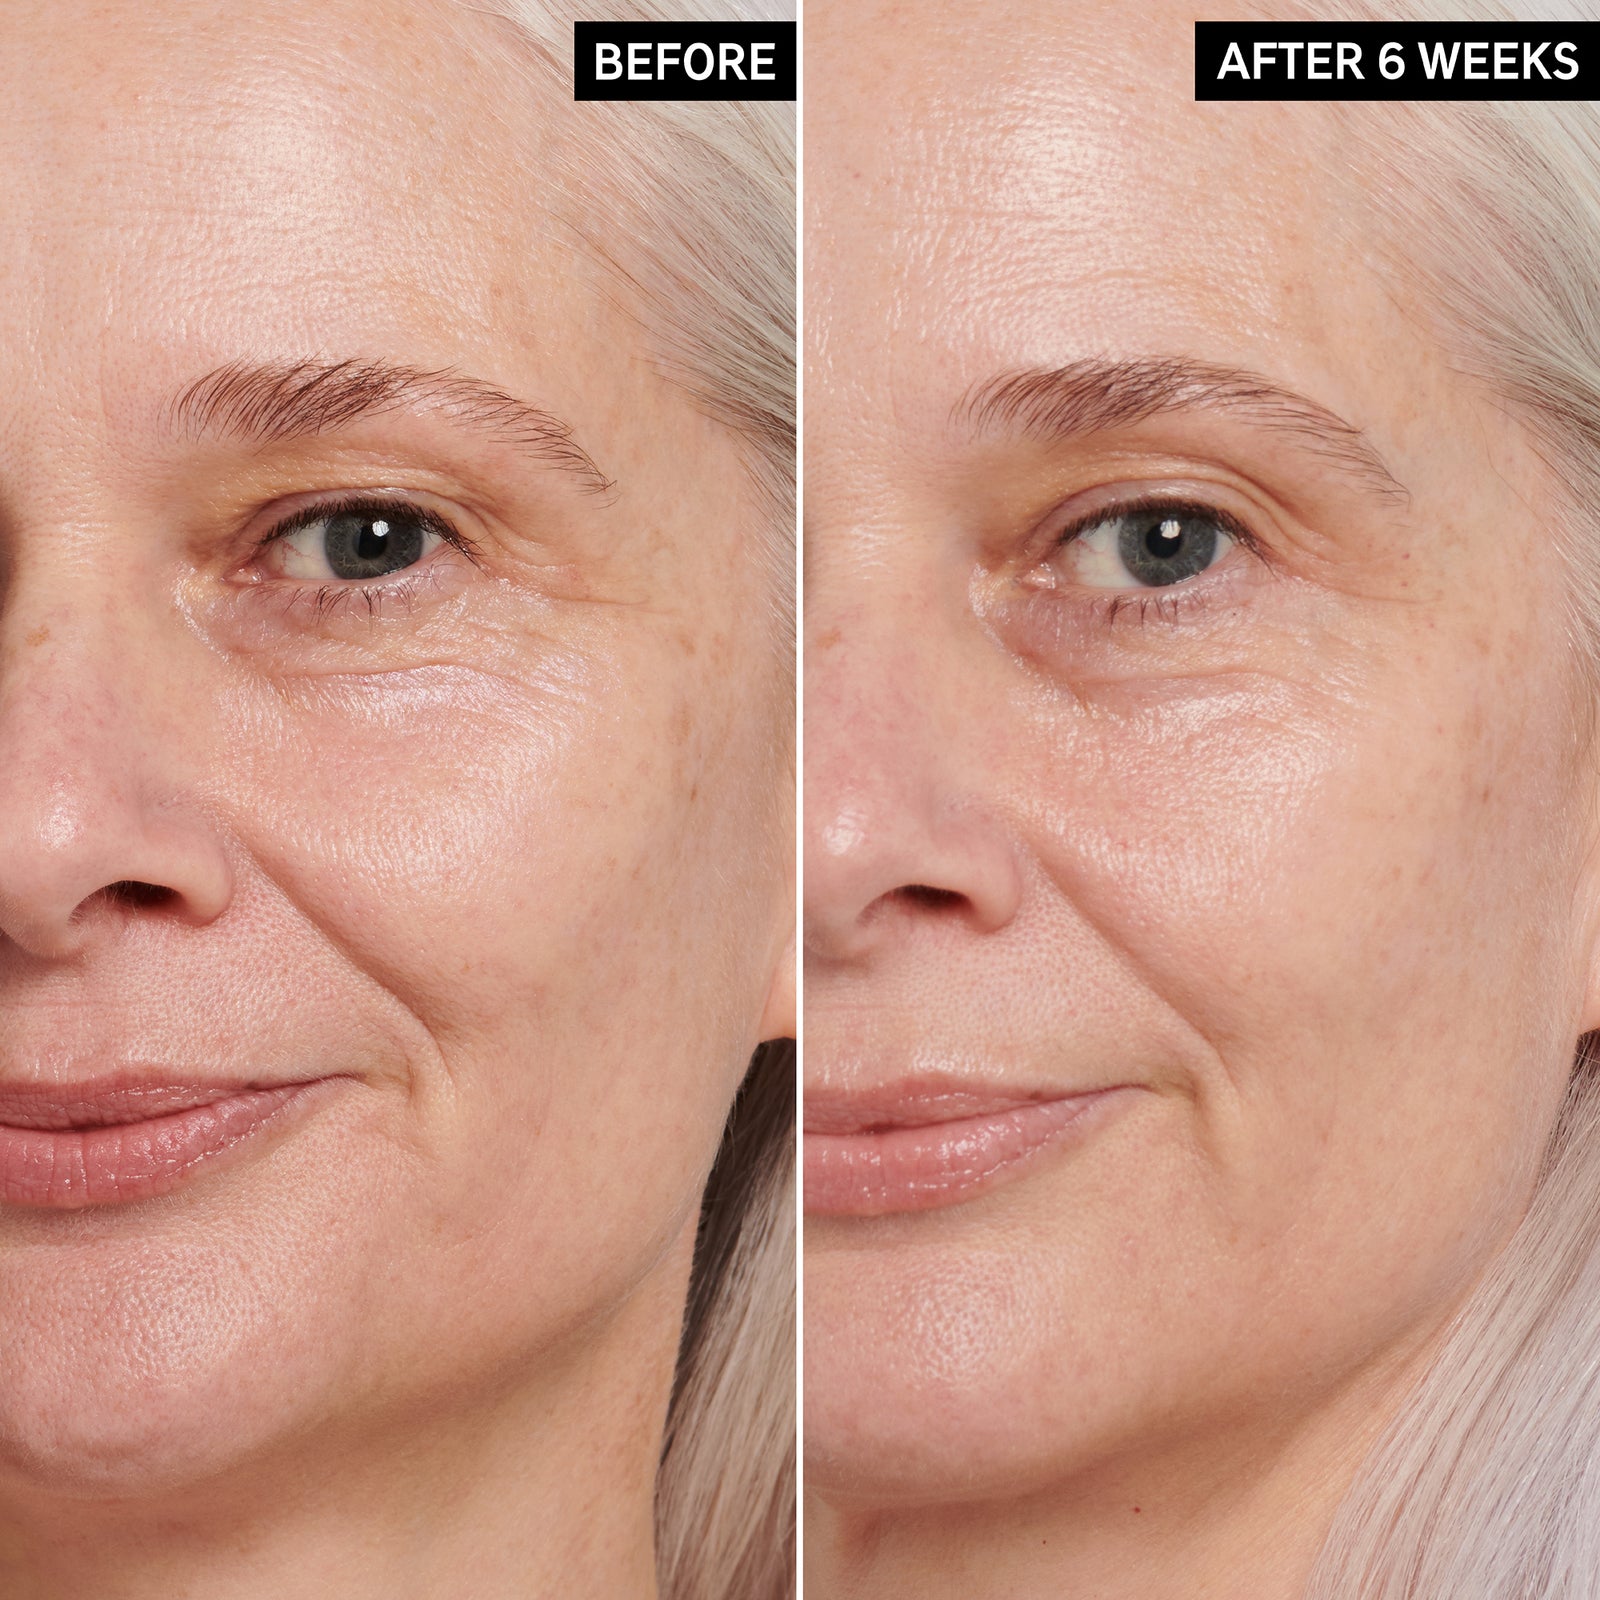 Before and after images side by side from results using Retinol Eye Cream